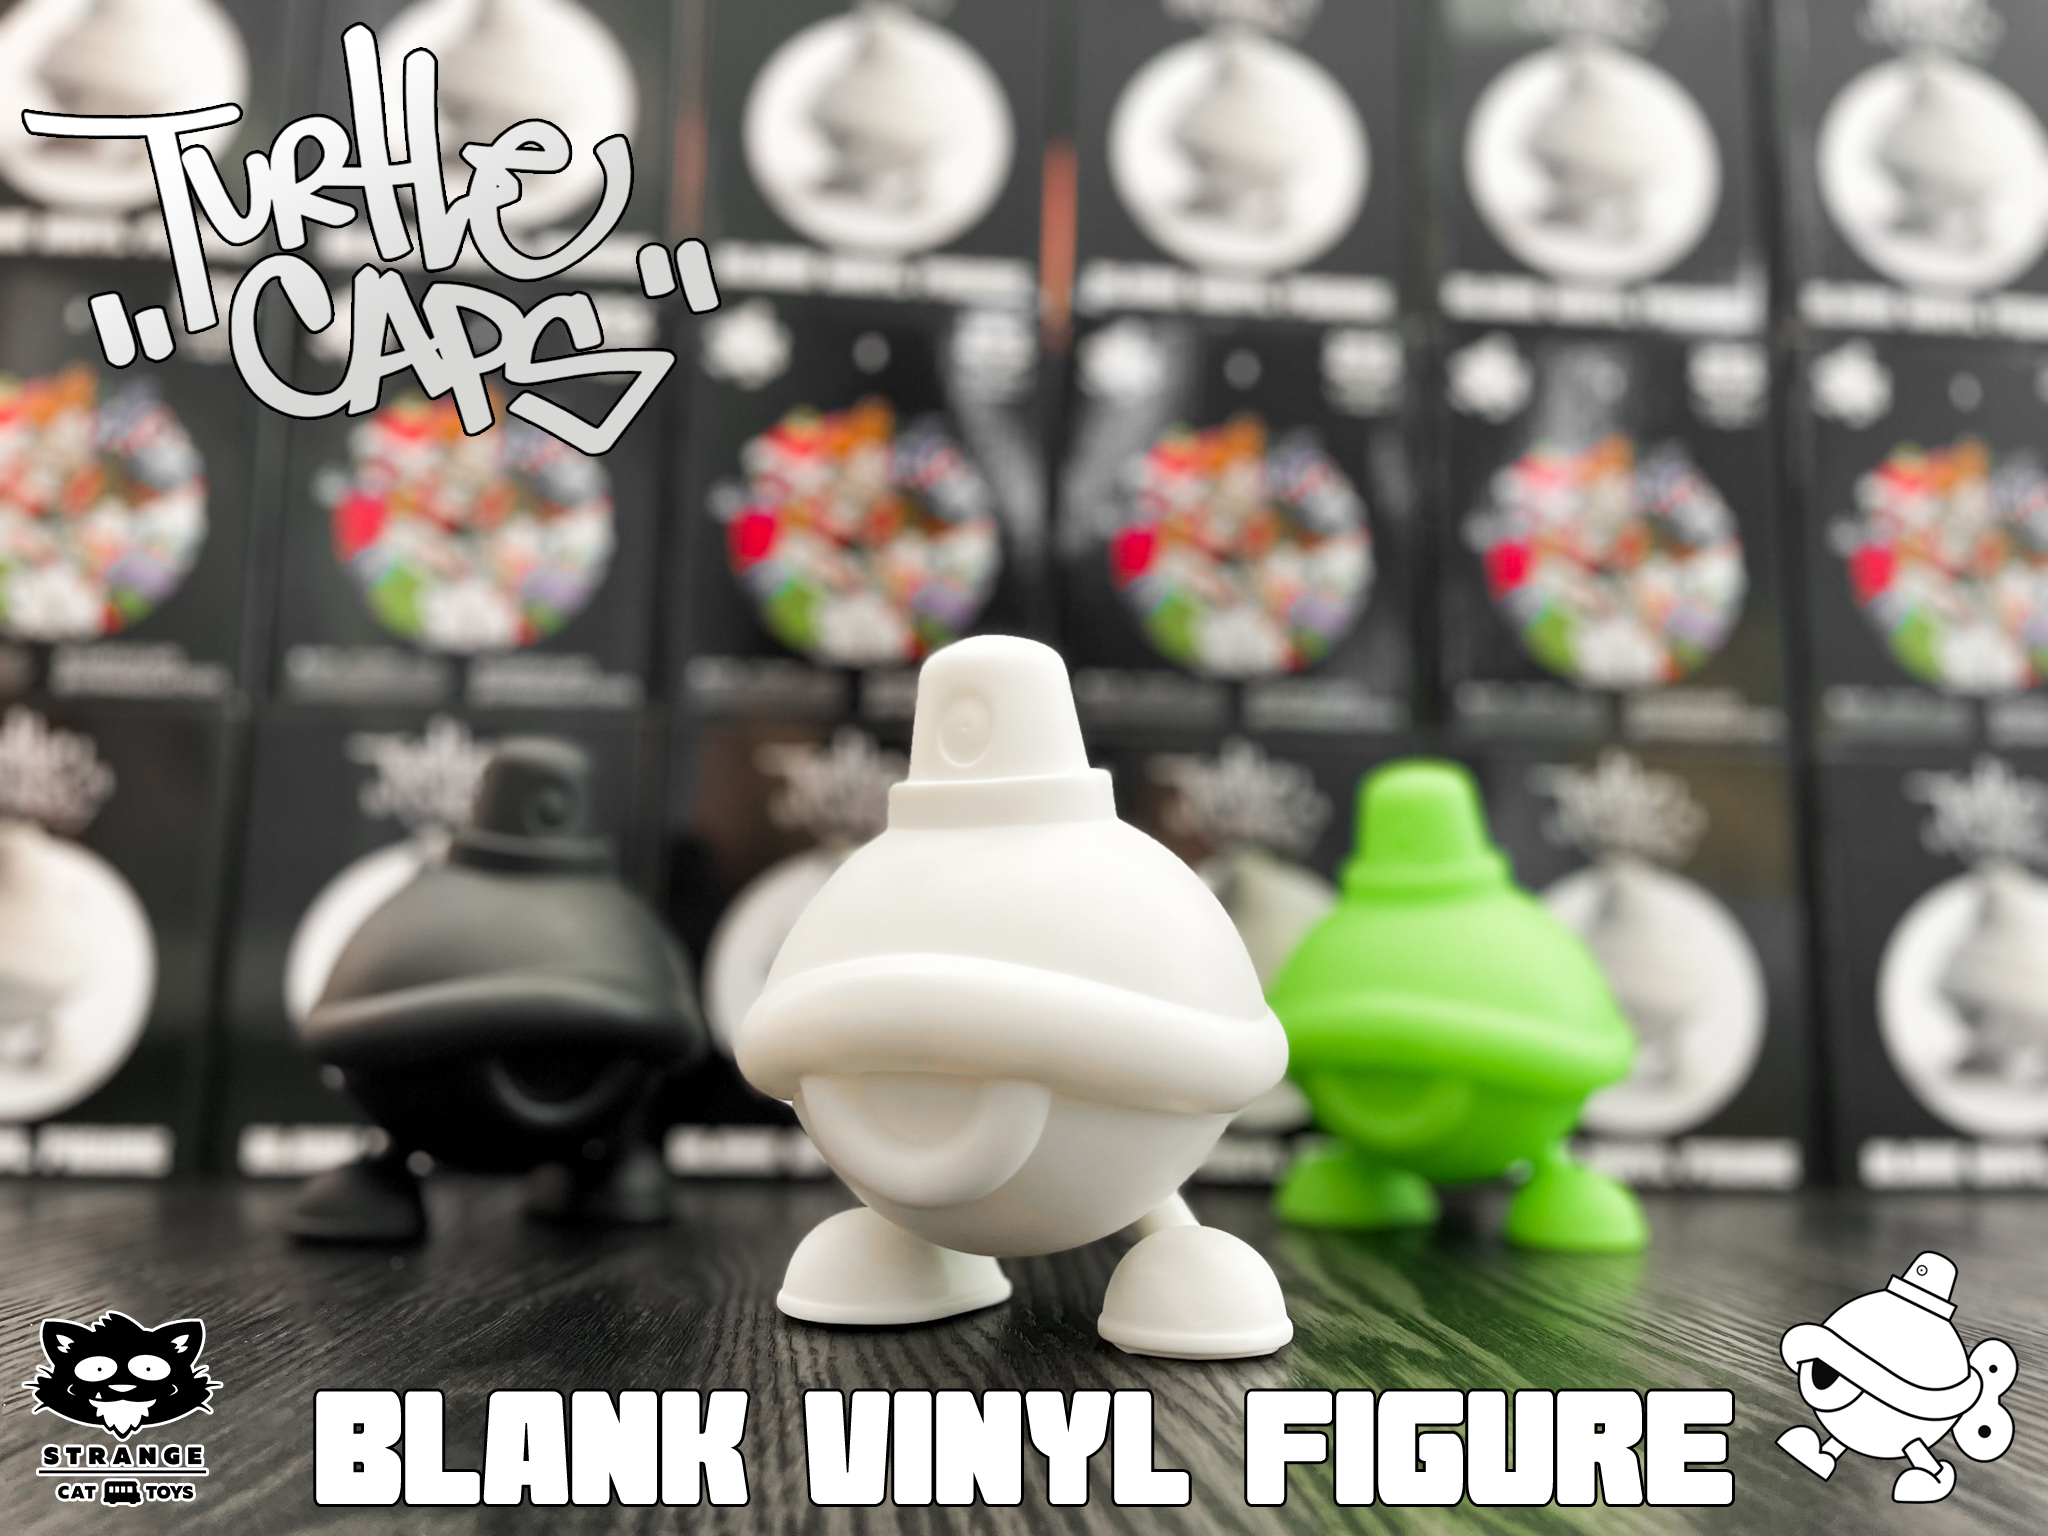 A group of plastic toys featuring a green toy, a white toy with legs and arms, a blurry black toy, and a cartoon character with a hat, part of the Turtle Caps Blank Vinyl Toy collection.